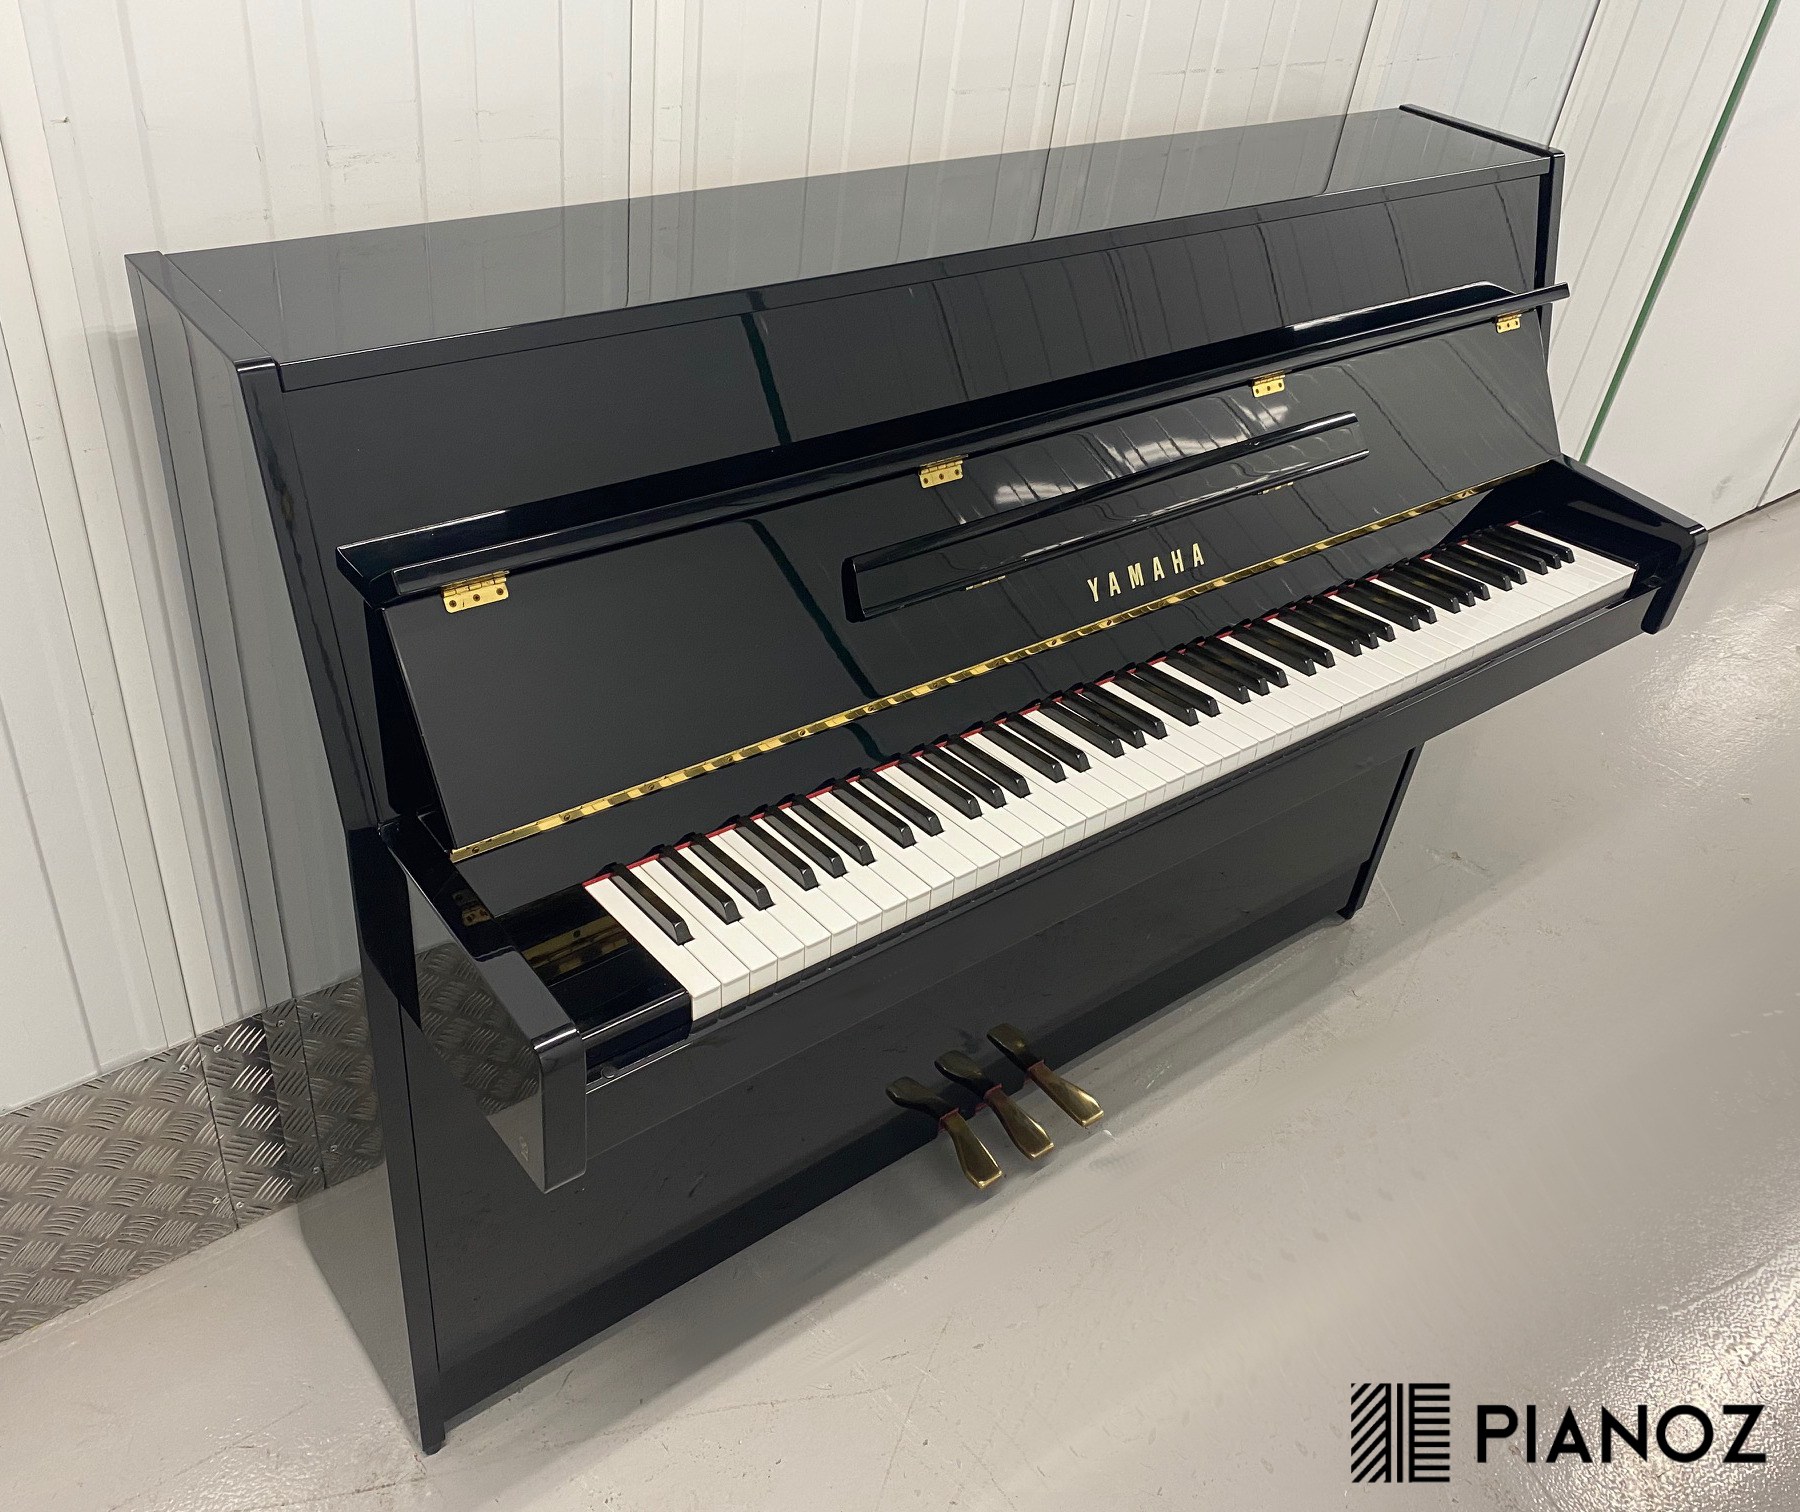 Yamaha C108 Japanese Upright Piano piano for sale in UK